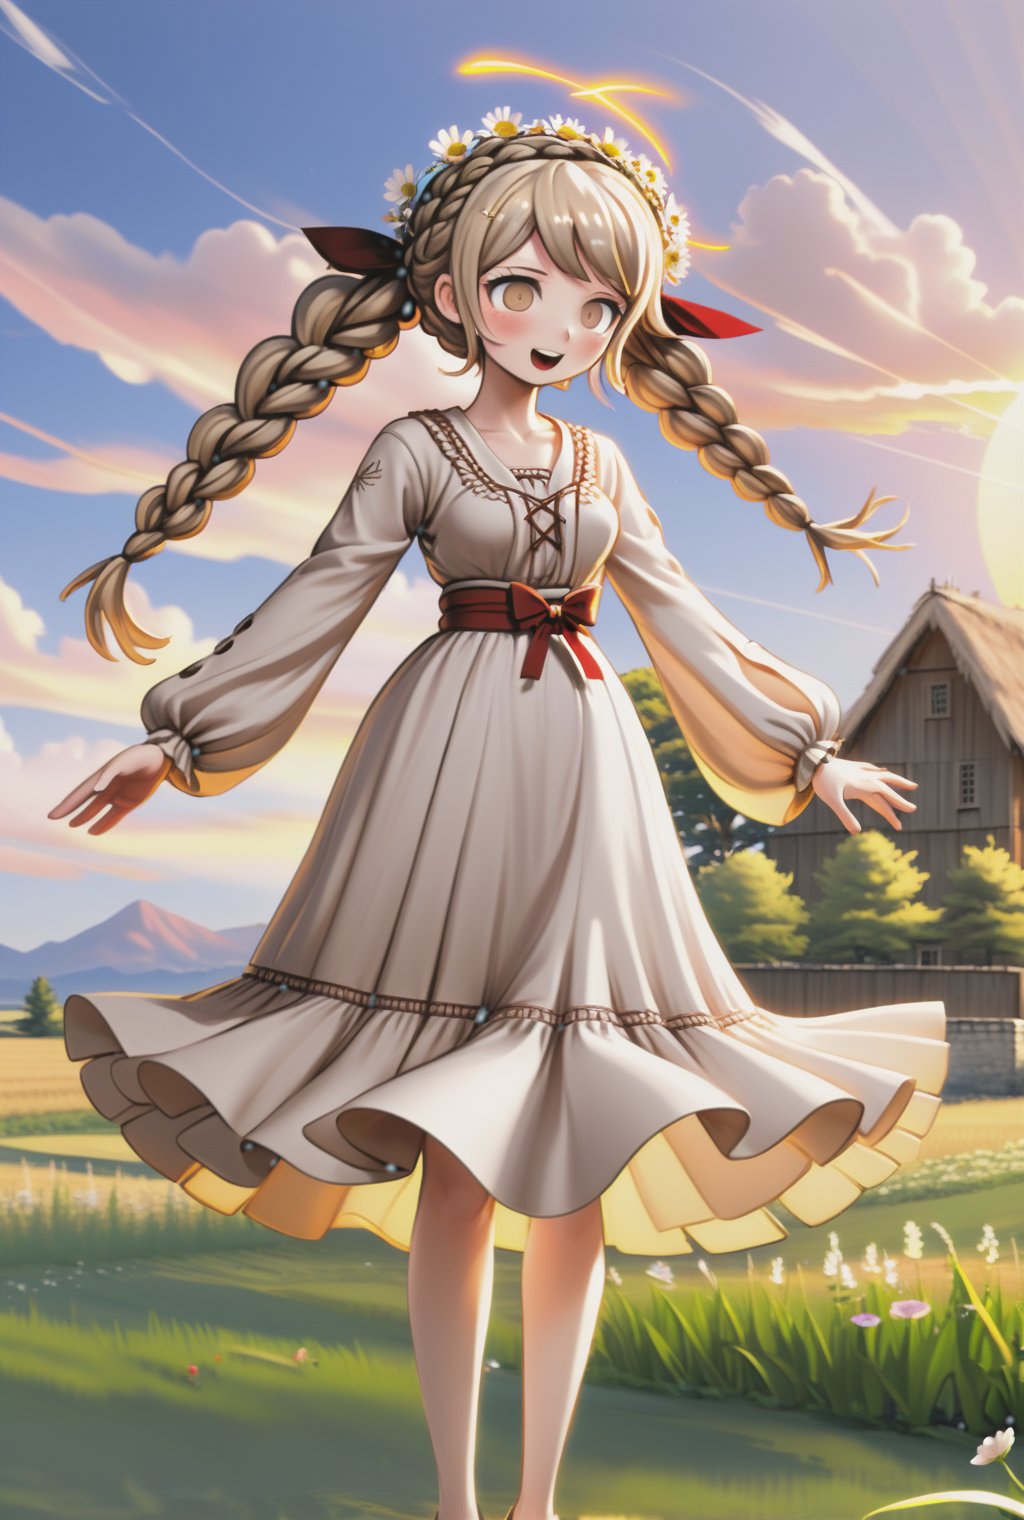 1girl, serene moment, picturesque landscape, golden hour light, flowing dress, billowing skirt, carefree gesture, wind-tossed hair, open fields, rustic setting, gentle breeze, sunset glow, rosy cheeks, joyful expression, floral crown, braided hairstyle, playful pose, danganronpa style, thick lines, full-body portrait, detailed eyes, <lora:danganronpa_style:0.8>